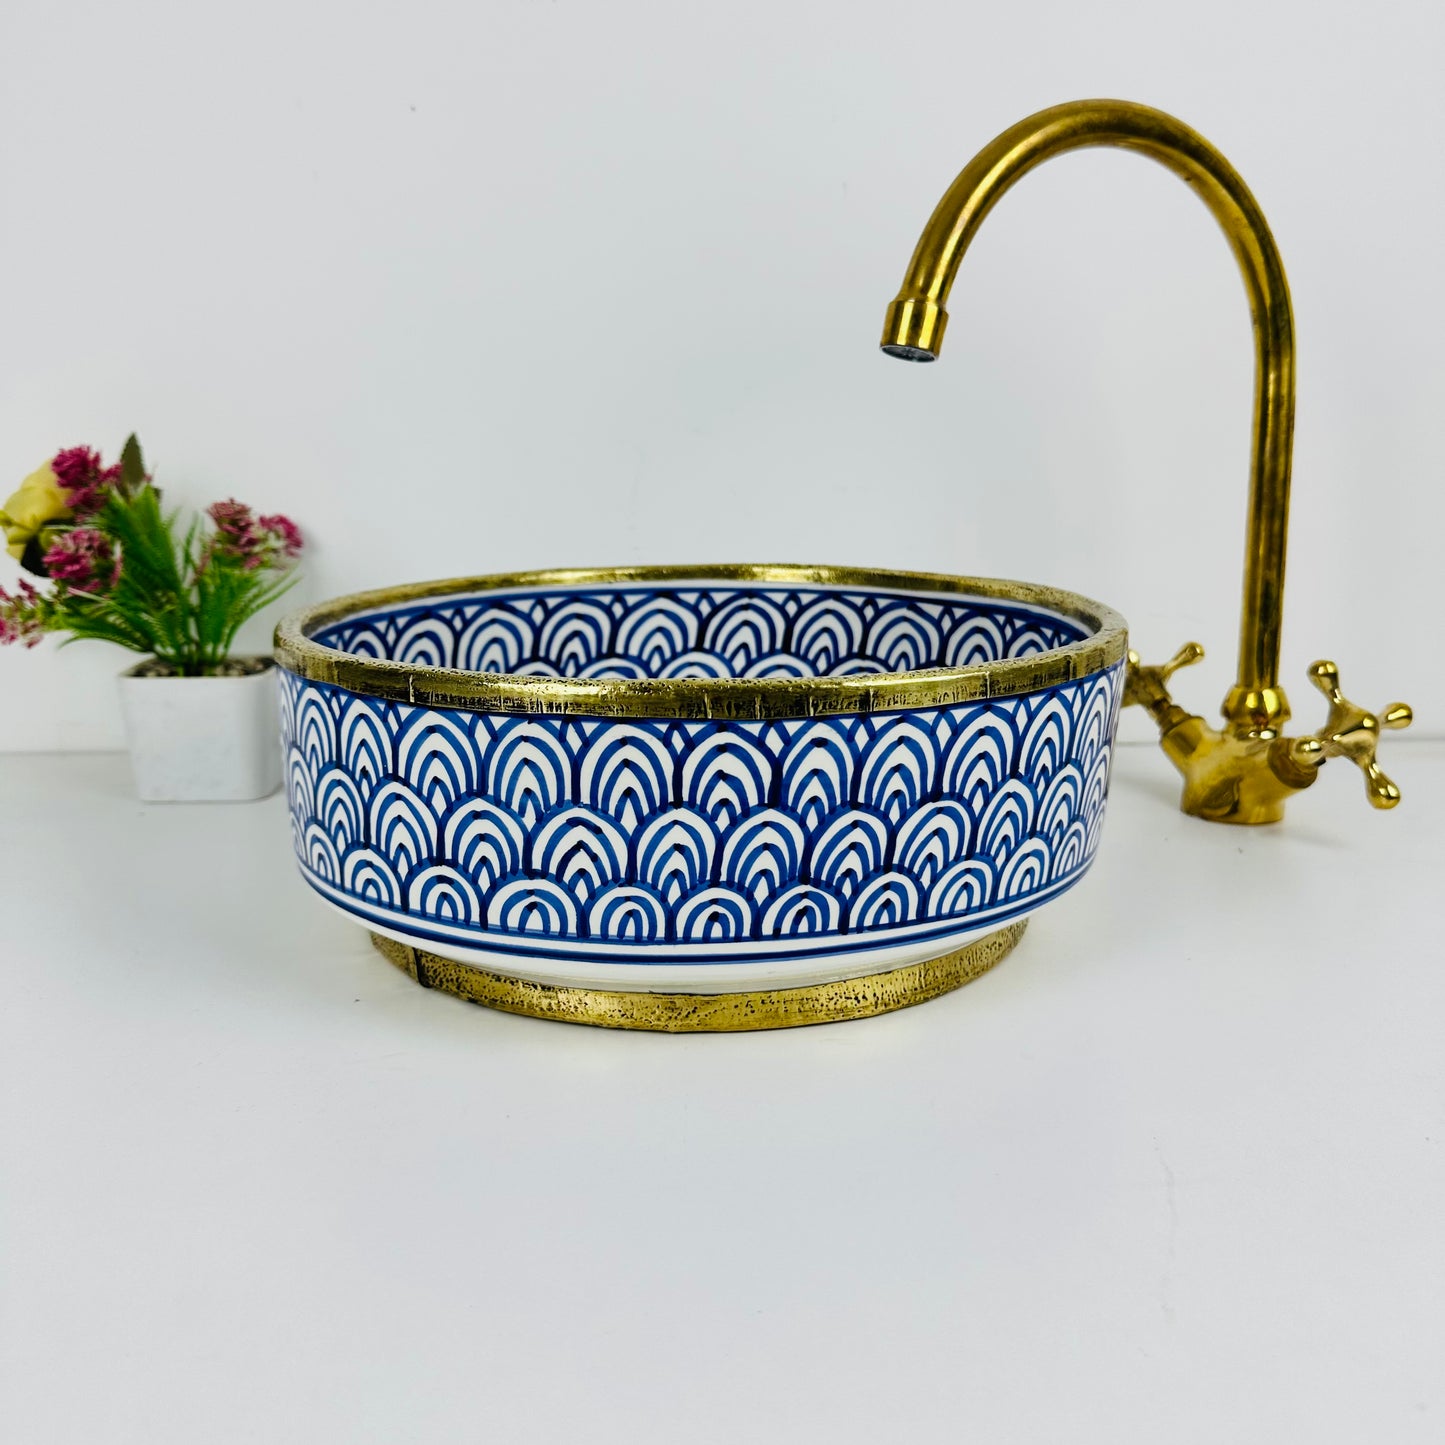 Azure Waters: Handcrafted Ceramic Sink in Azure Blue Shade